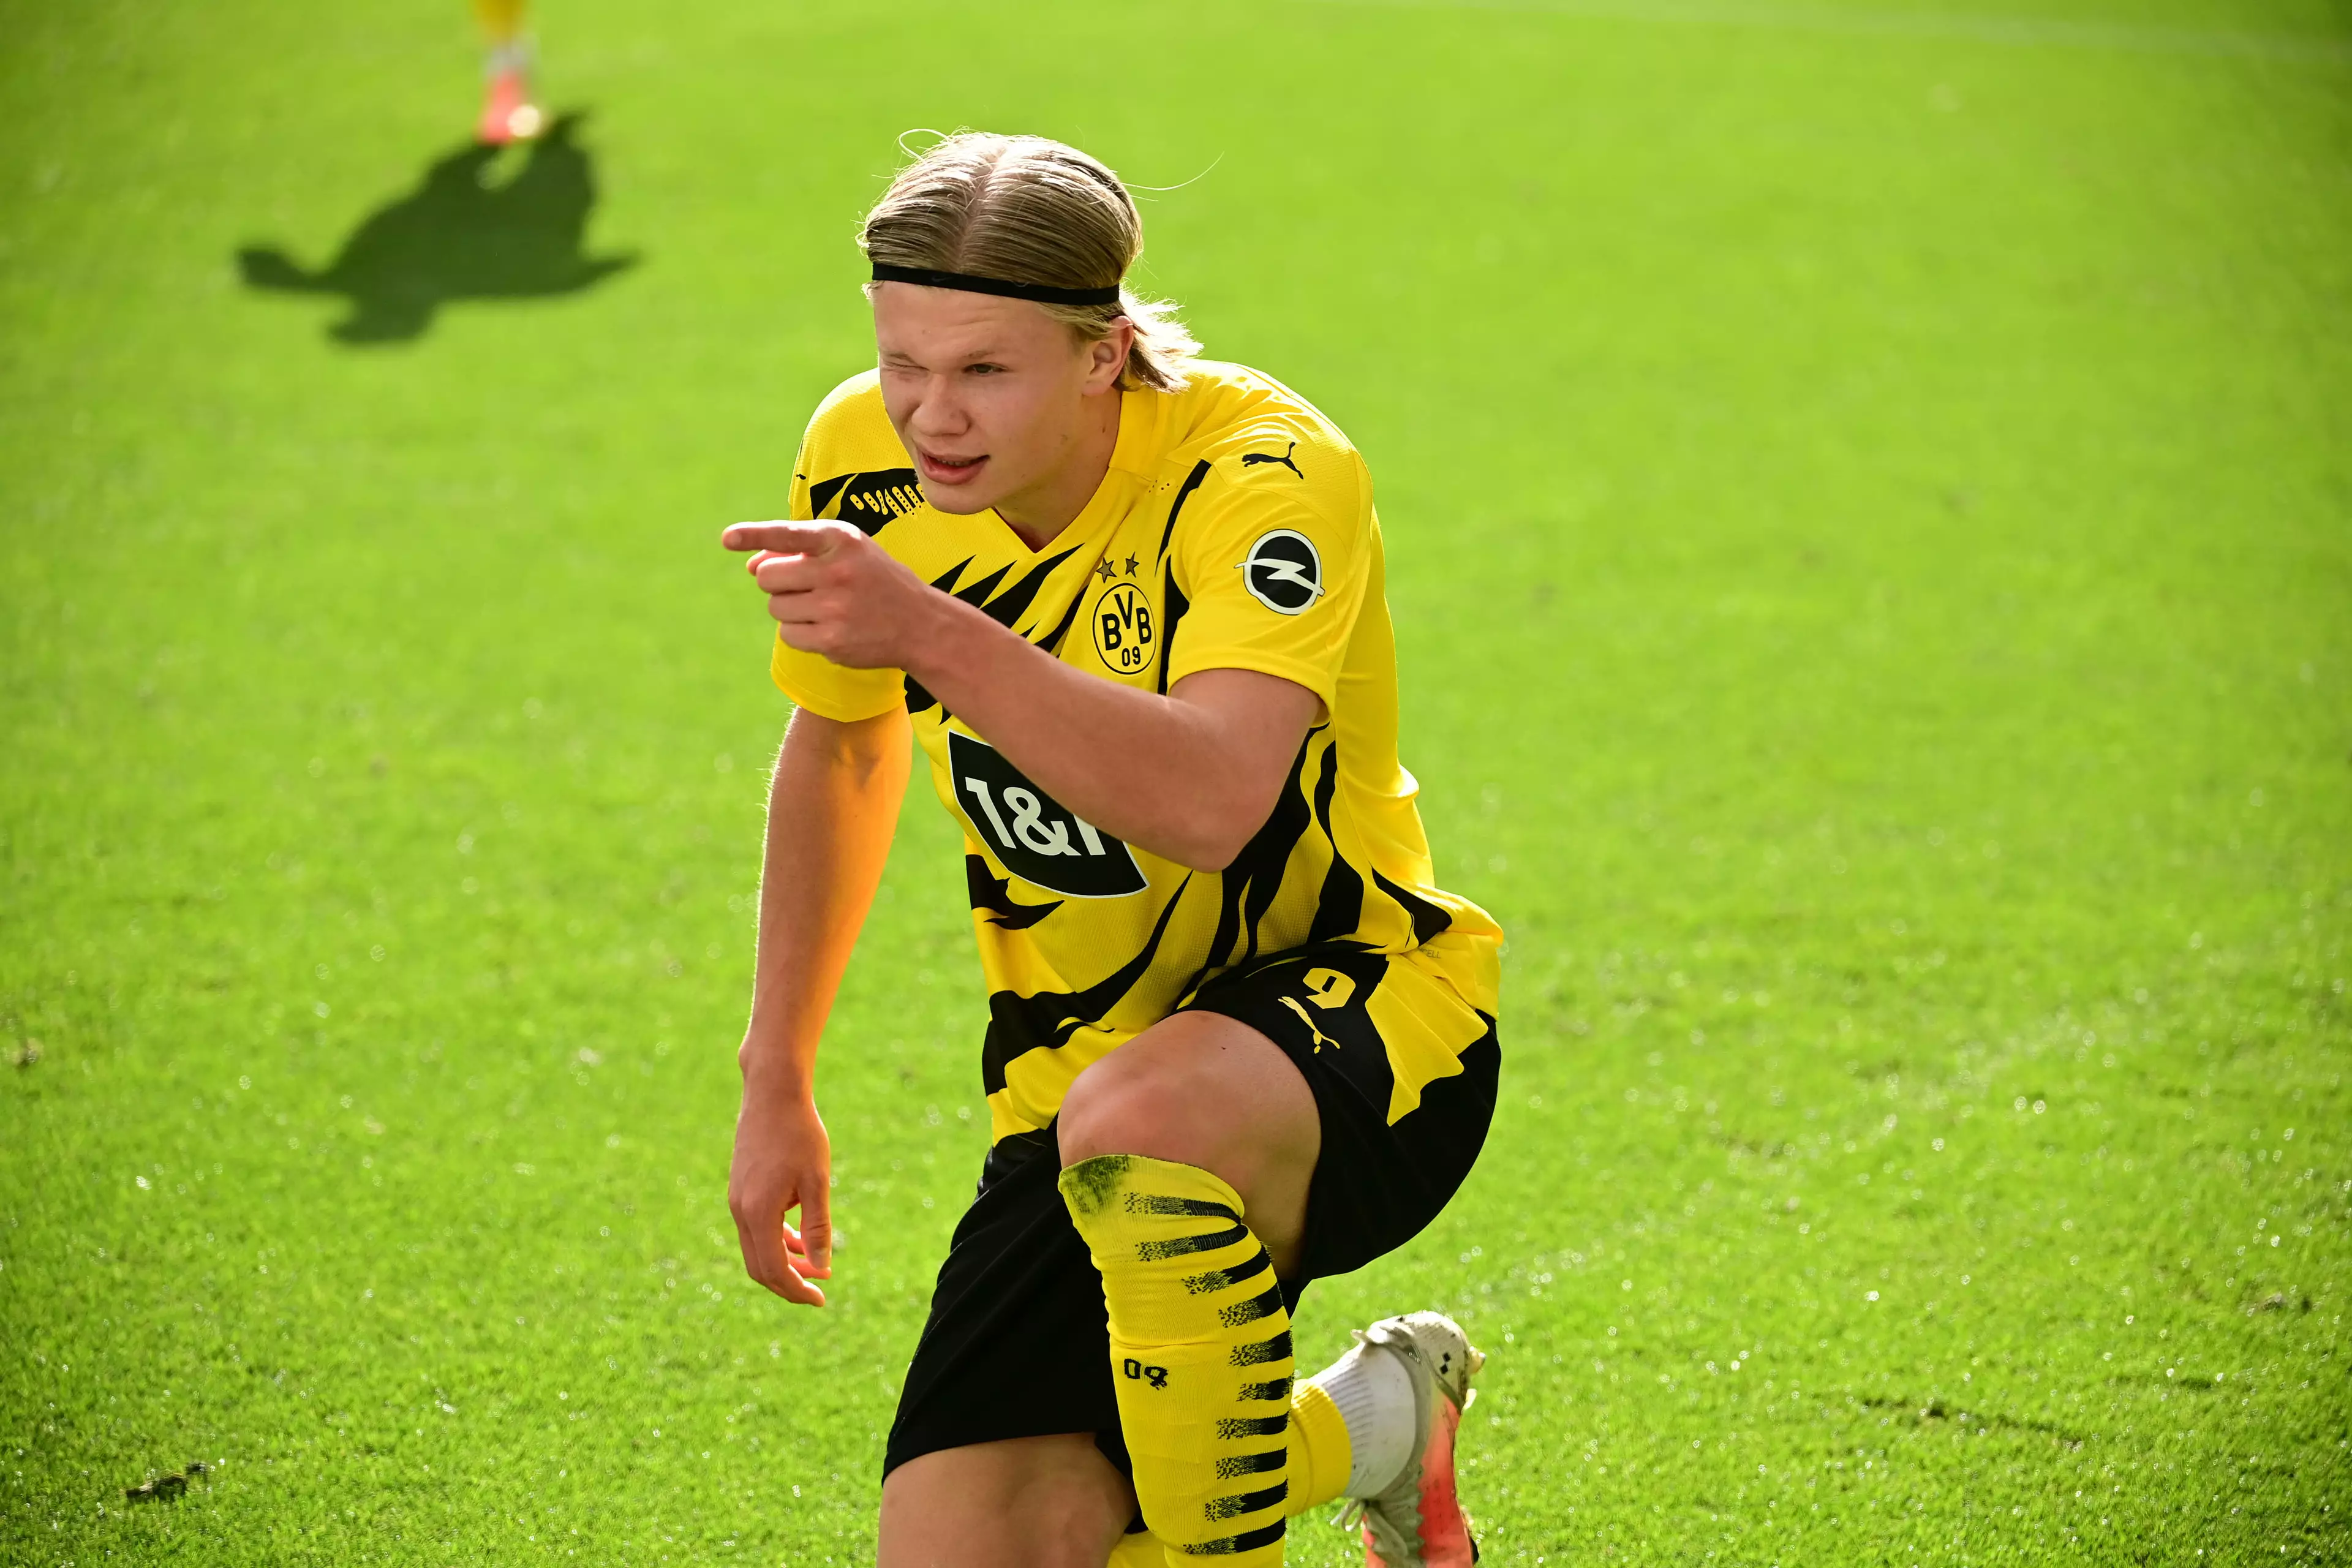 Dortmund want Haaland to stay. Image: PA Images